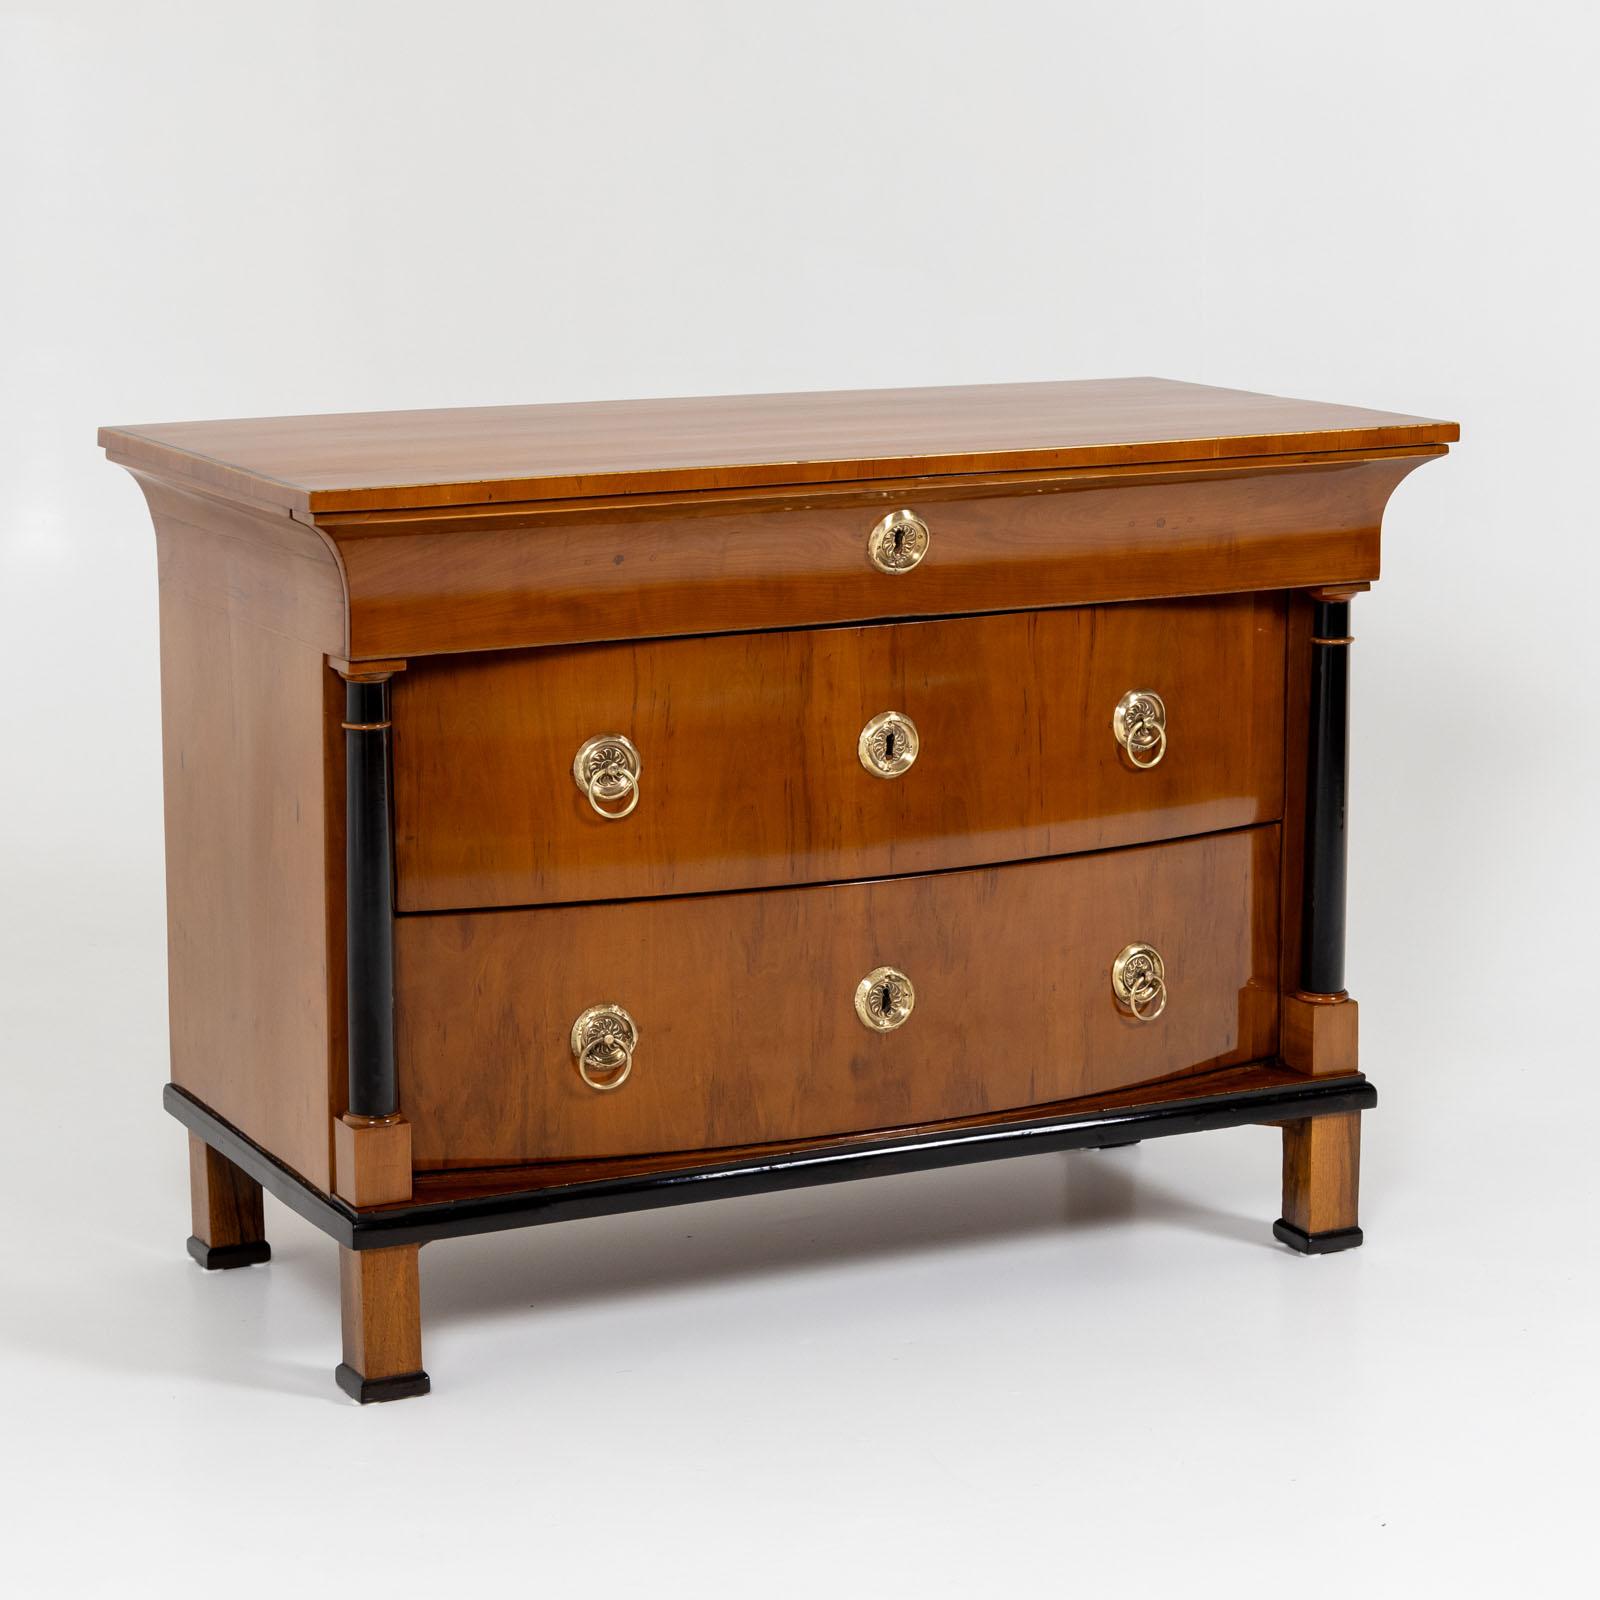 Biedermeier Chest of Drawers with ebonized Columns, Germany around 1820 In Good Condition For Sale In Greding, DE